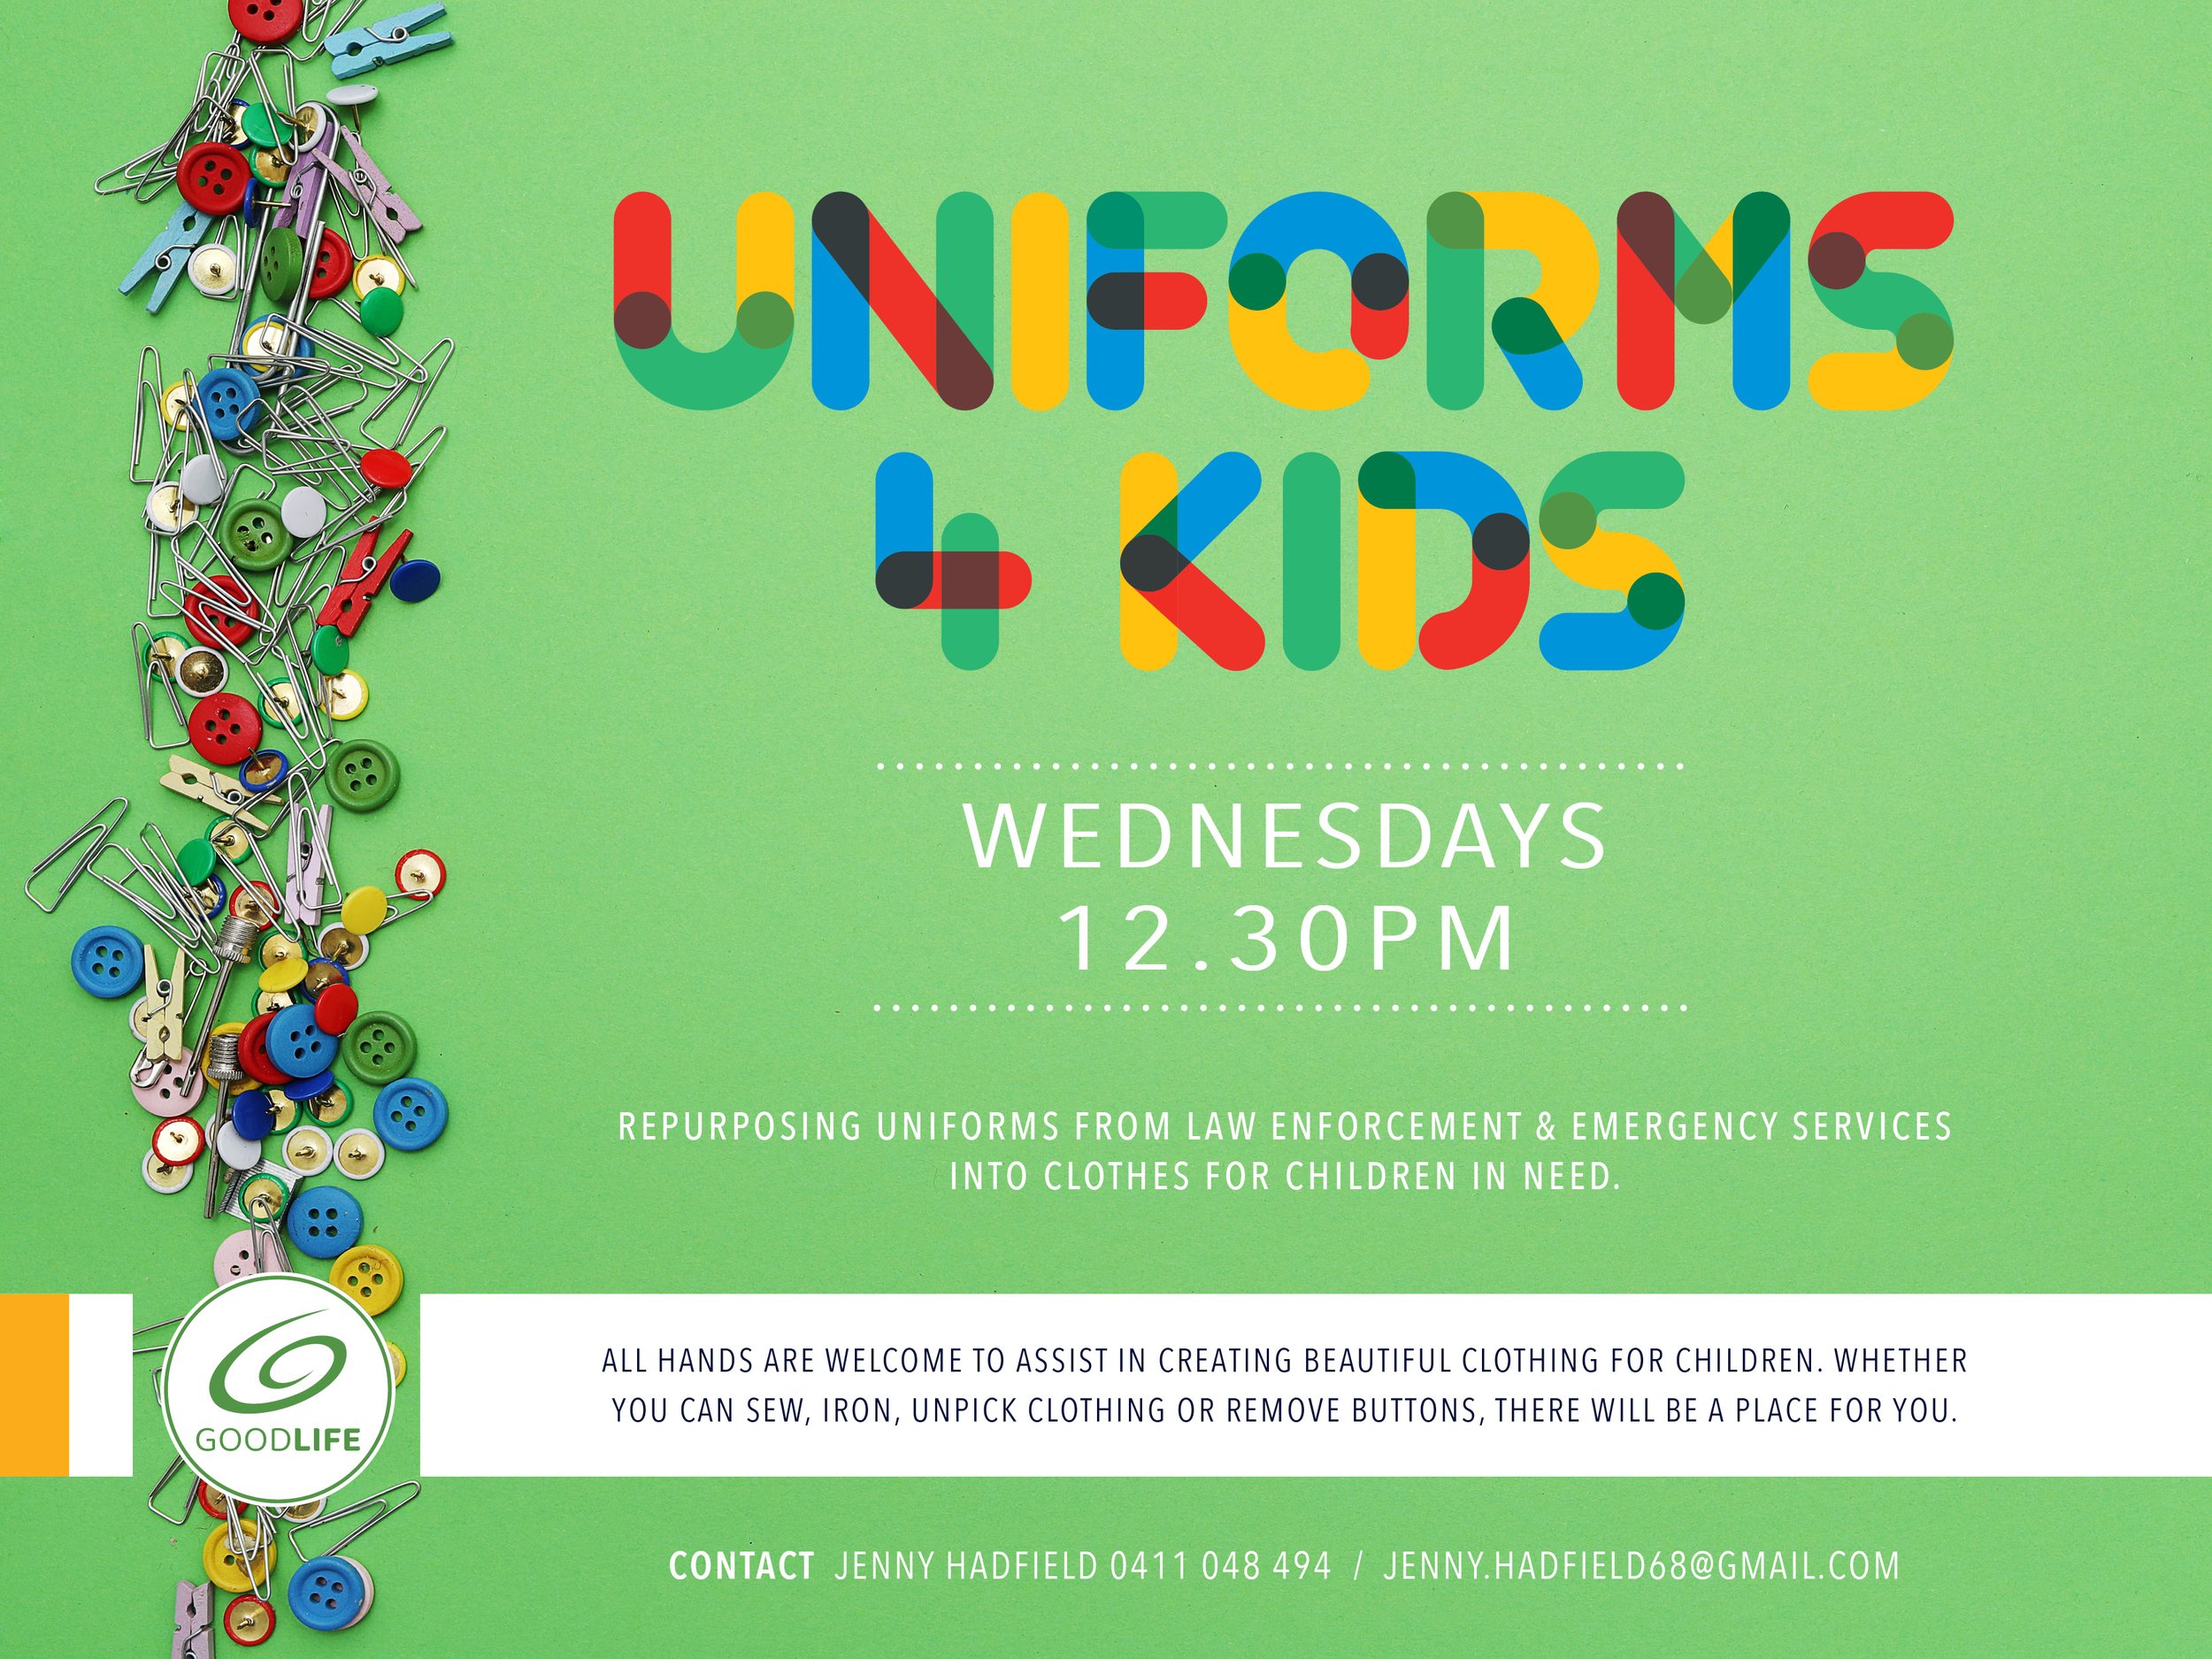 Uniforms for Kids - Email.jpg